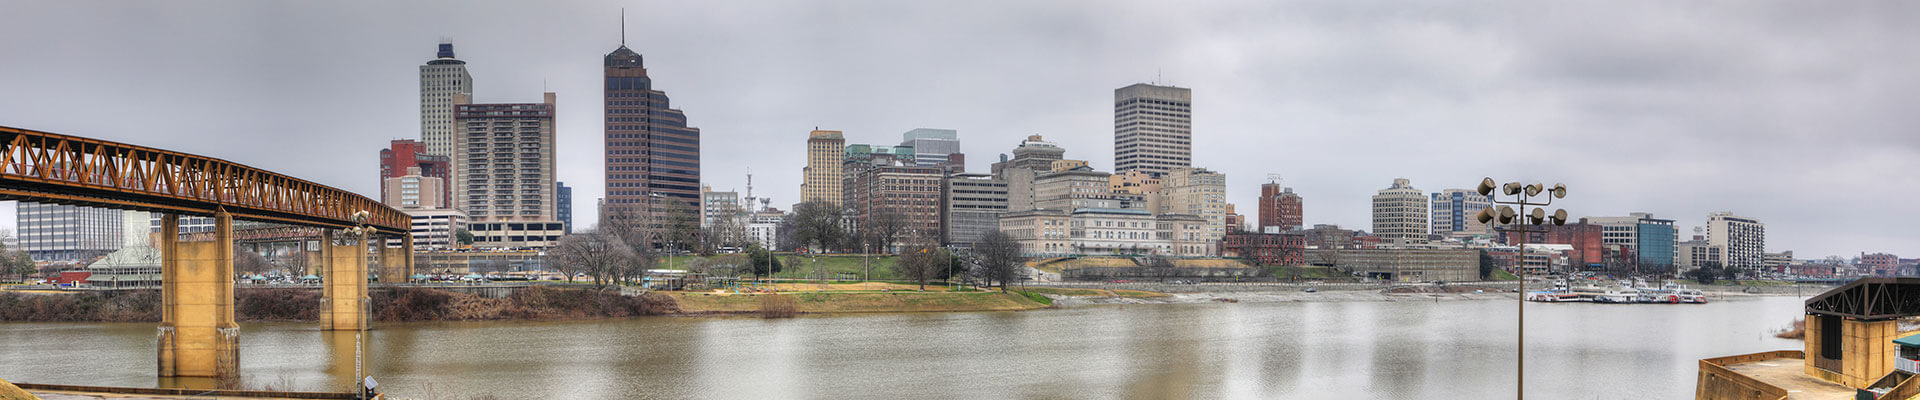 mississippi-river-and-memphis-skyline-memphis-tennessee